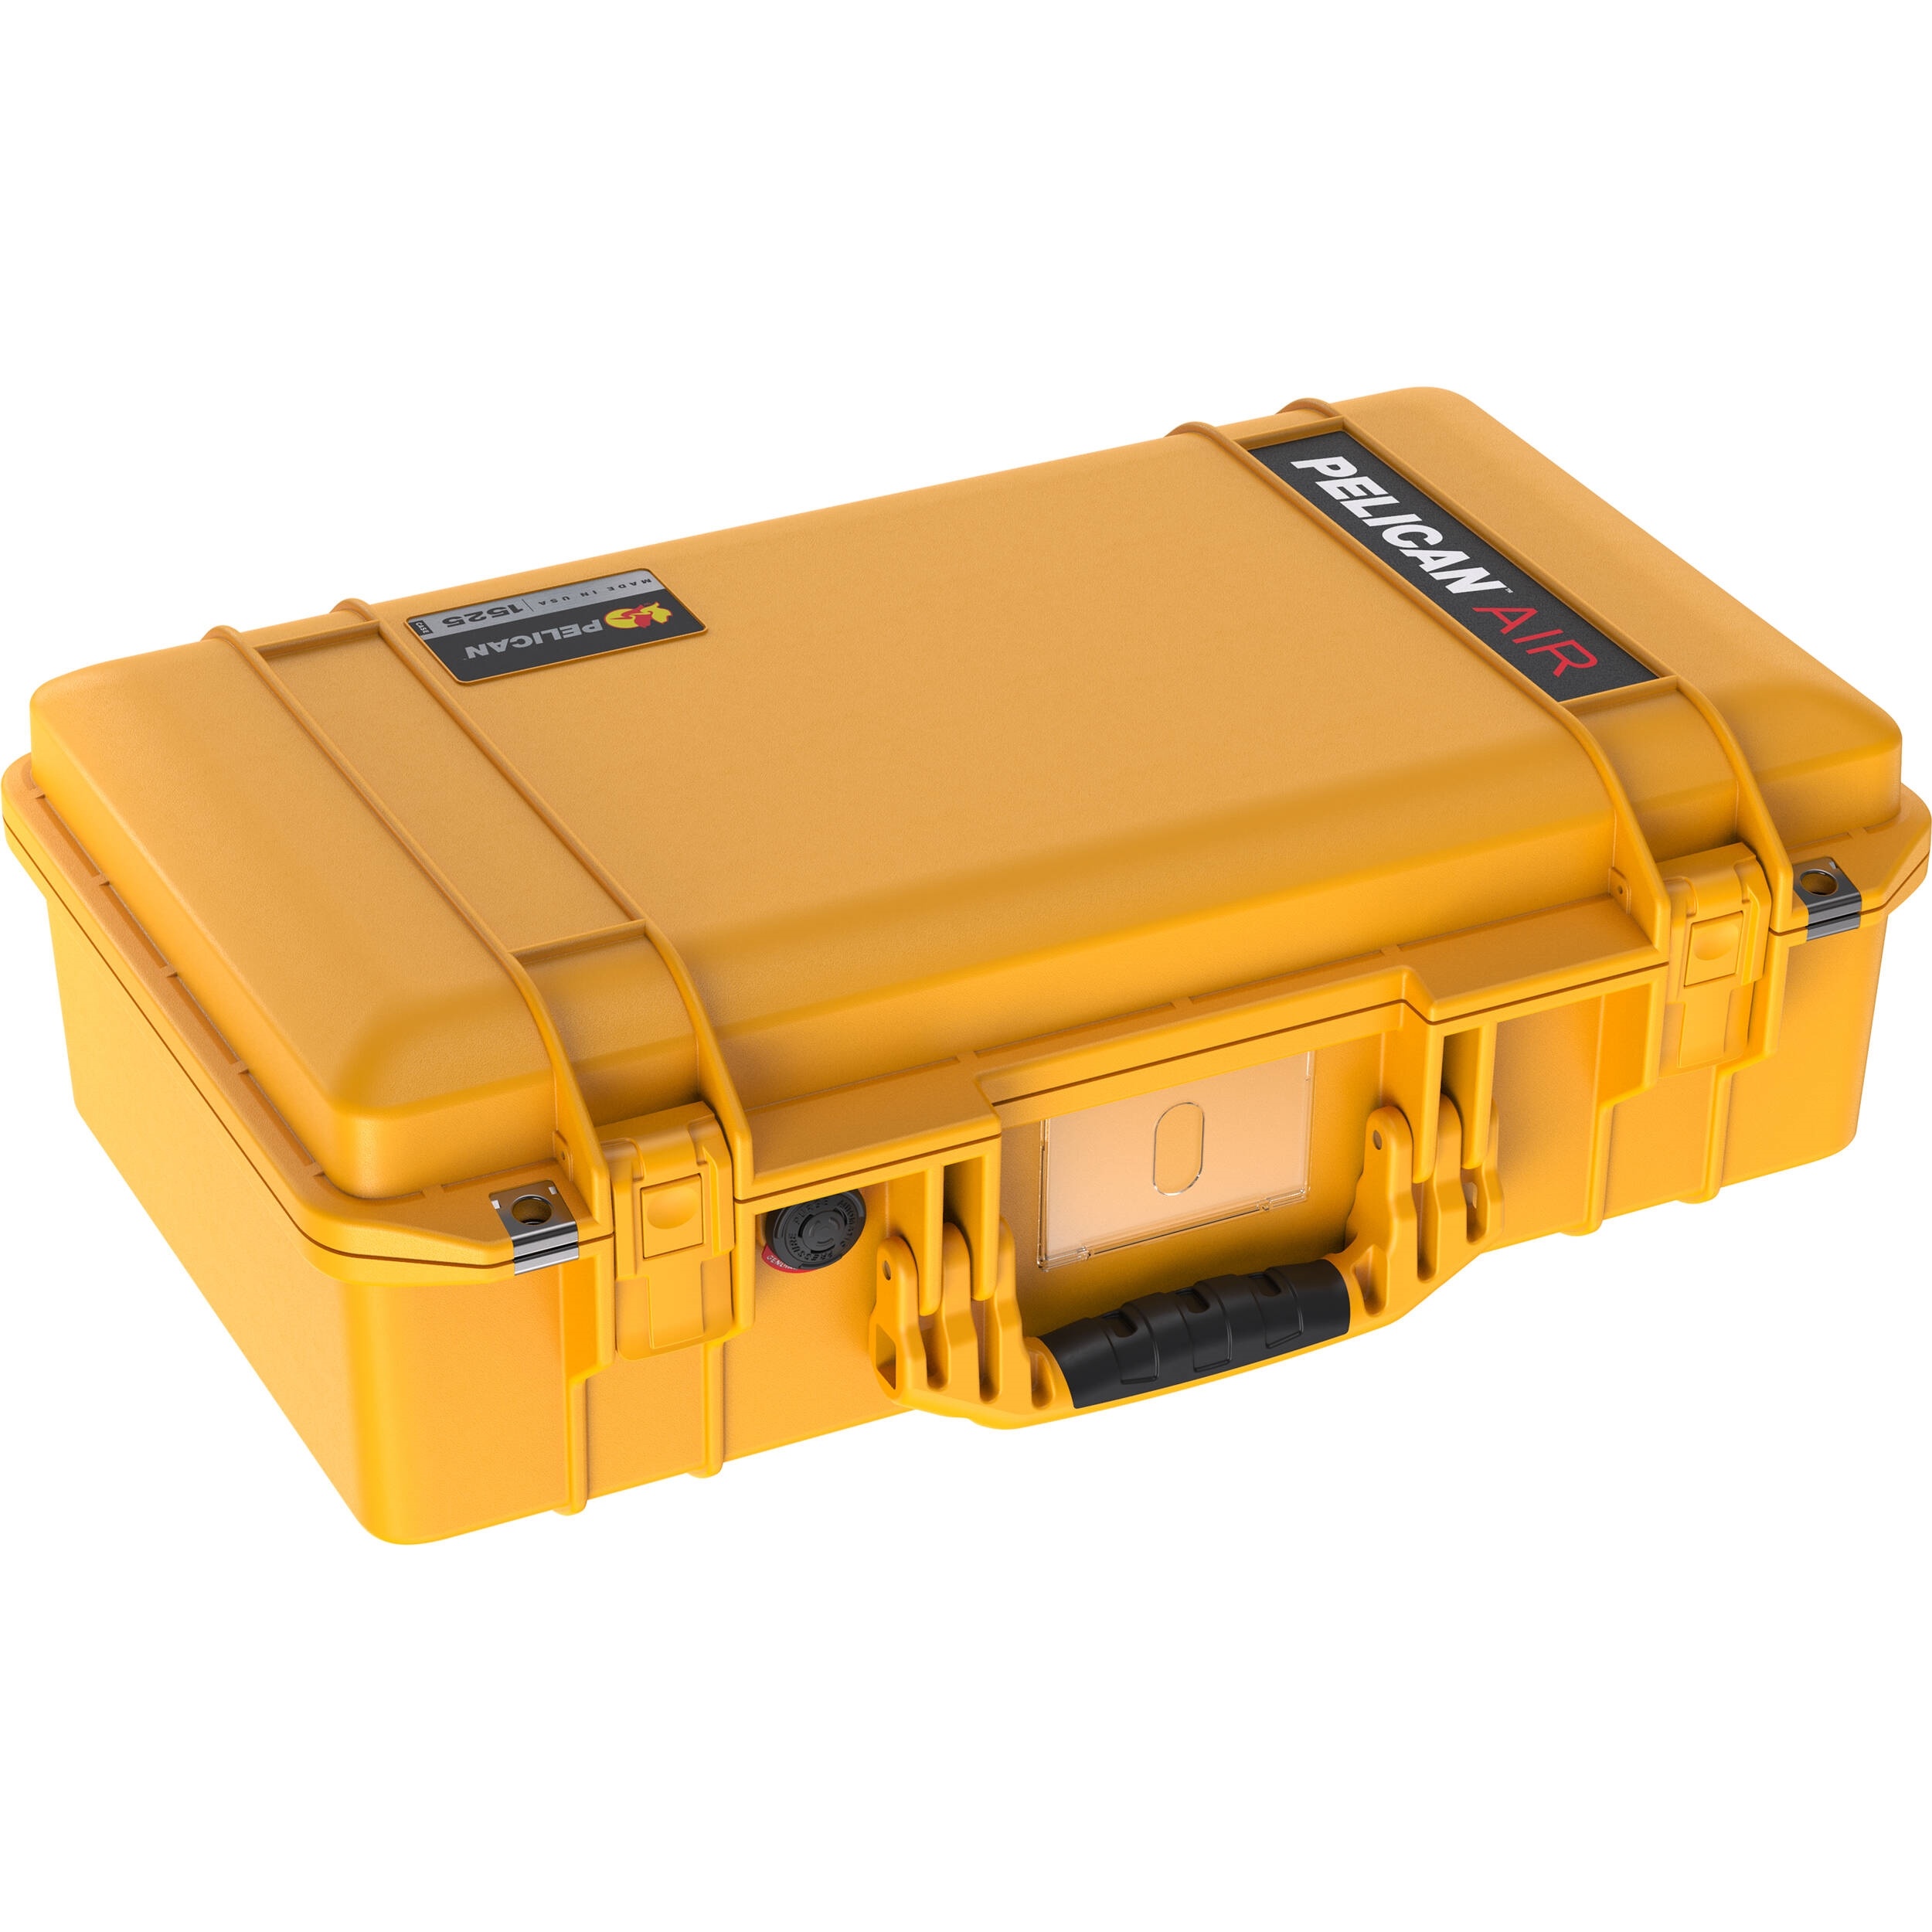 Pelican 1525Air Gen 2 Hard Carry Case with Liner, No Insert (Yellow)